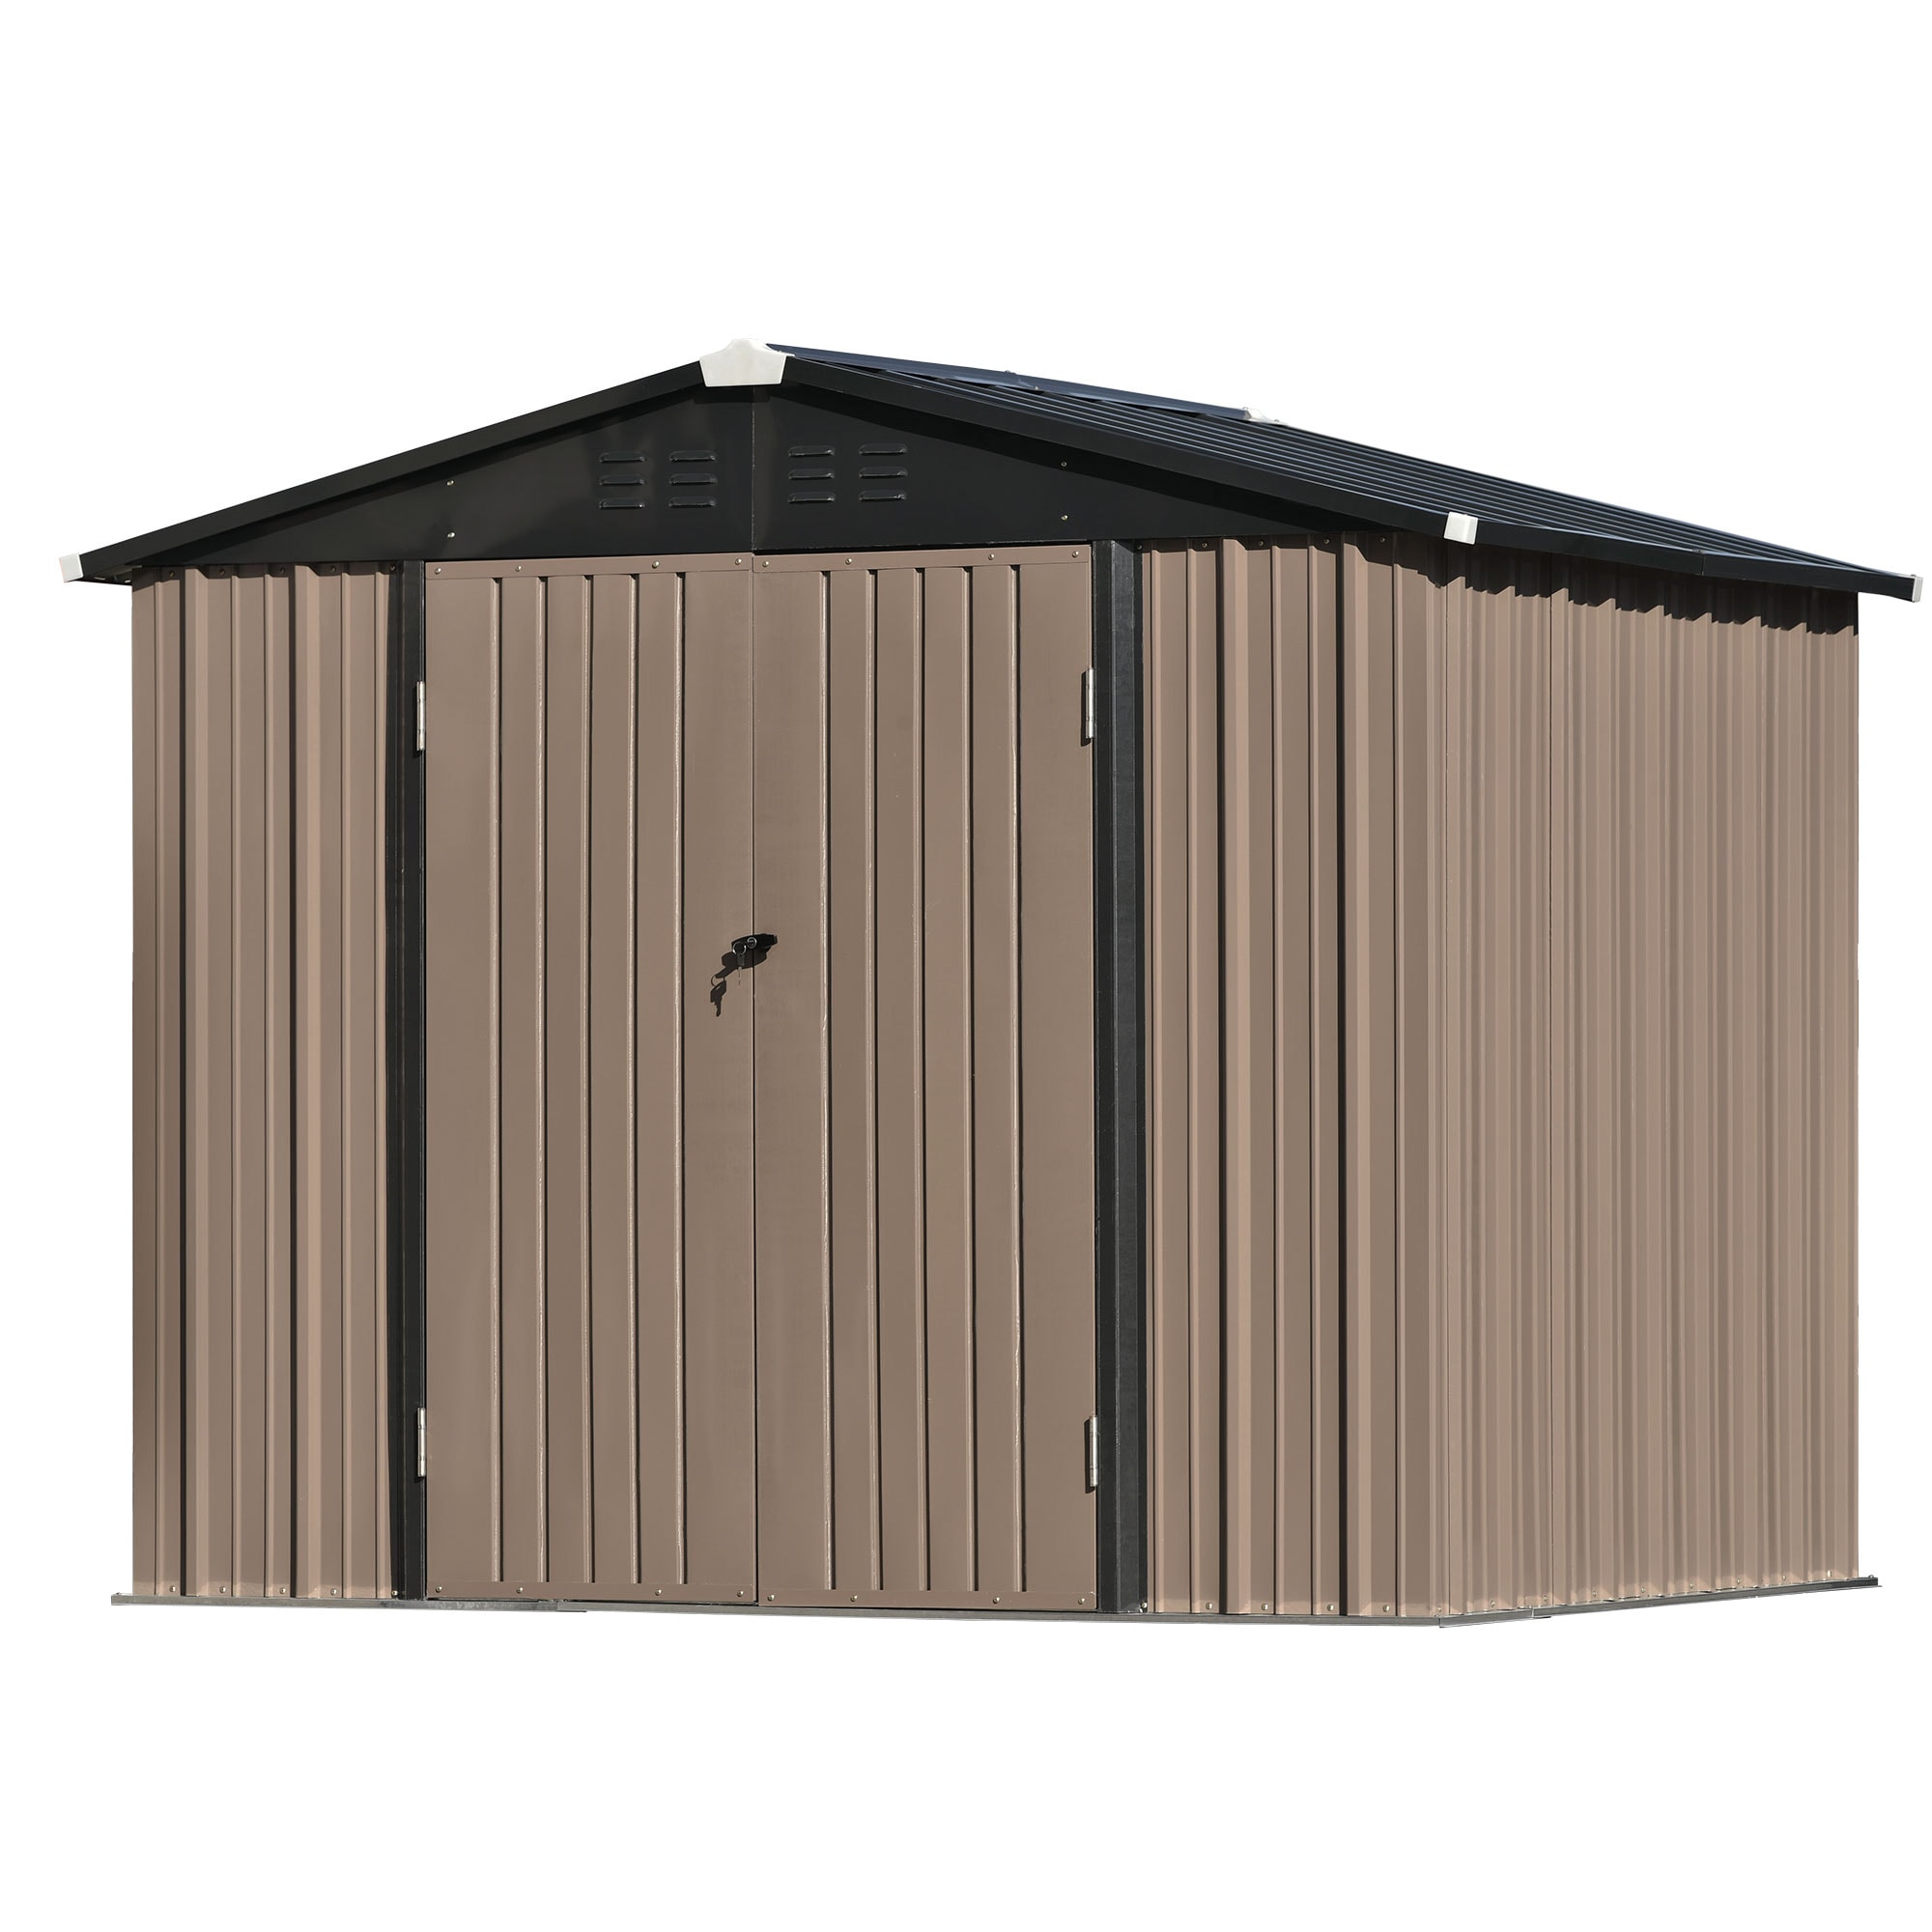 6-ft x 8-ft Metal Storage Shed Galvanized Steel Storage Shed in Brown | - WELLFOR TWSG017-BN